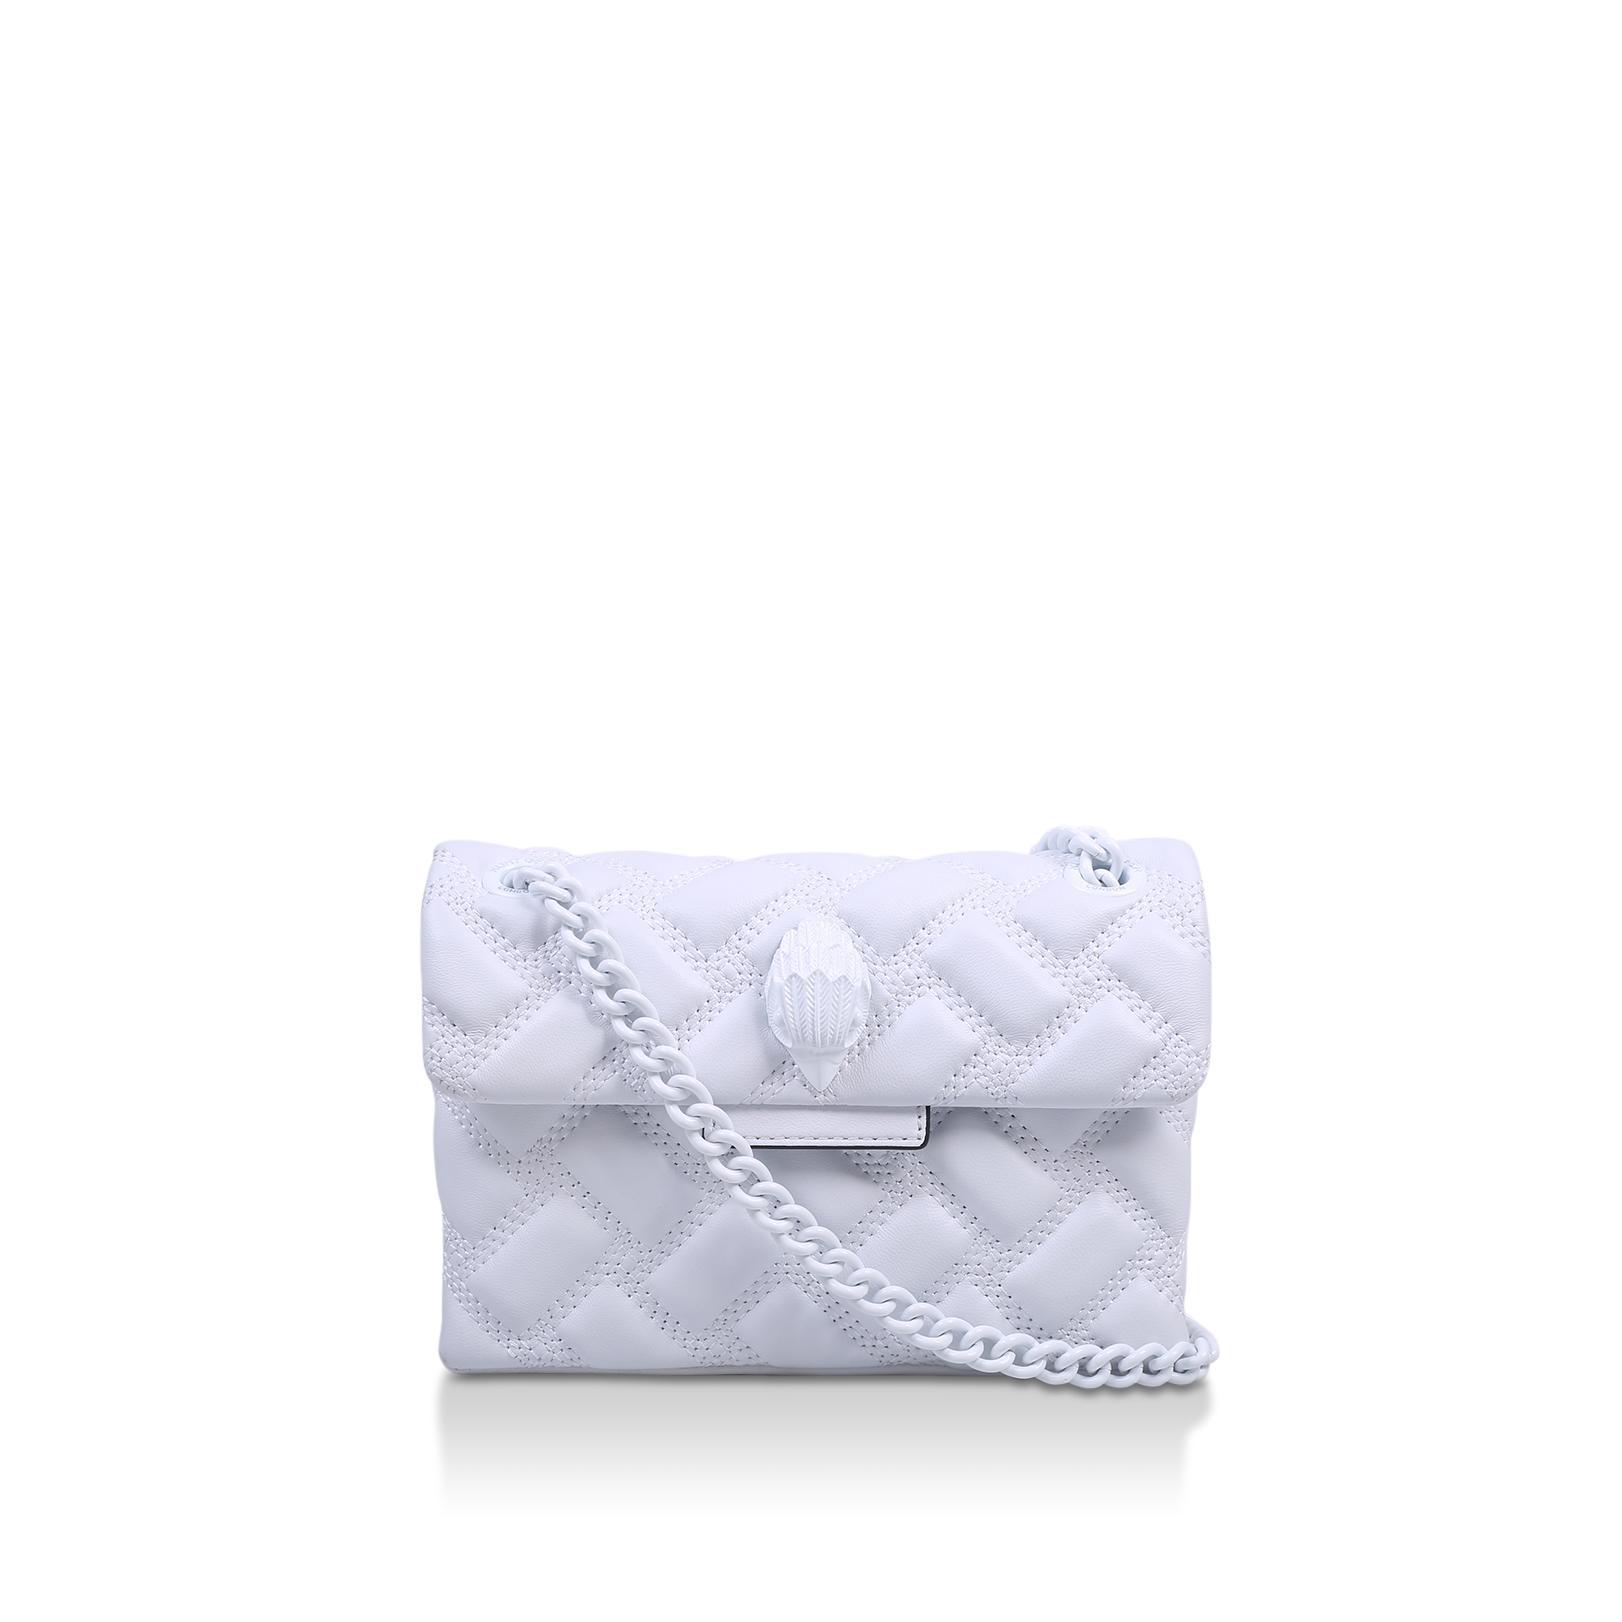 MINI KENSINGTON DRENCH White Quilted Leather Mini Bag by KURT GEIGER LONDON